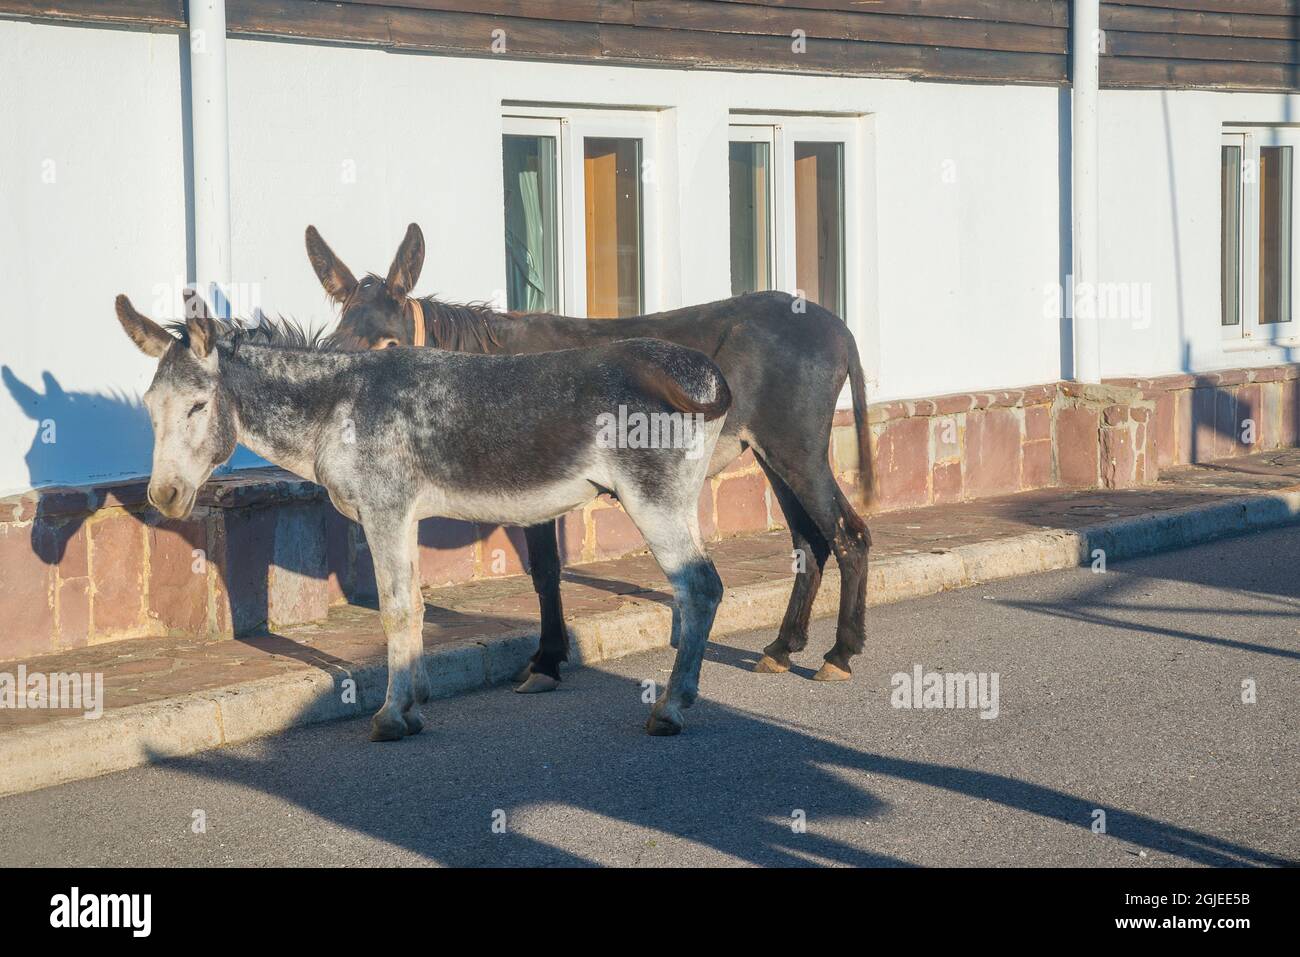 Two donkeys by a house. Stock Photo